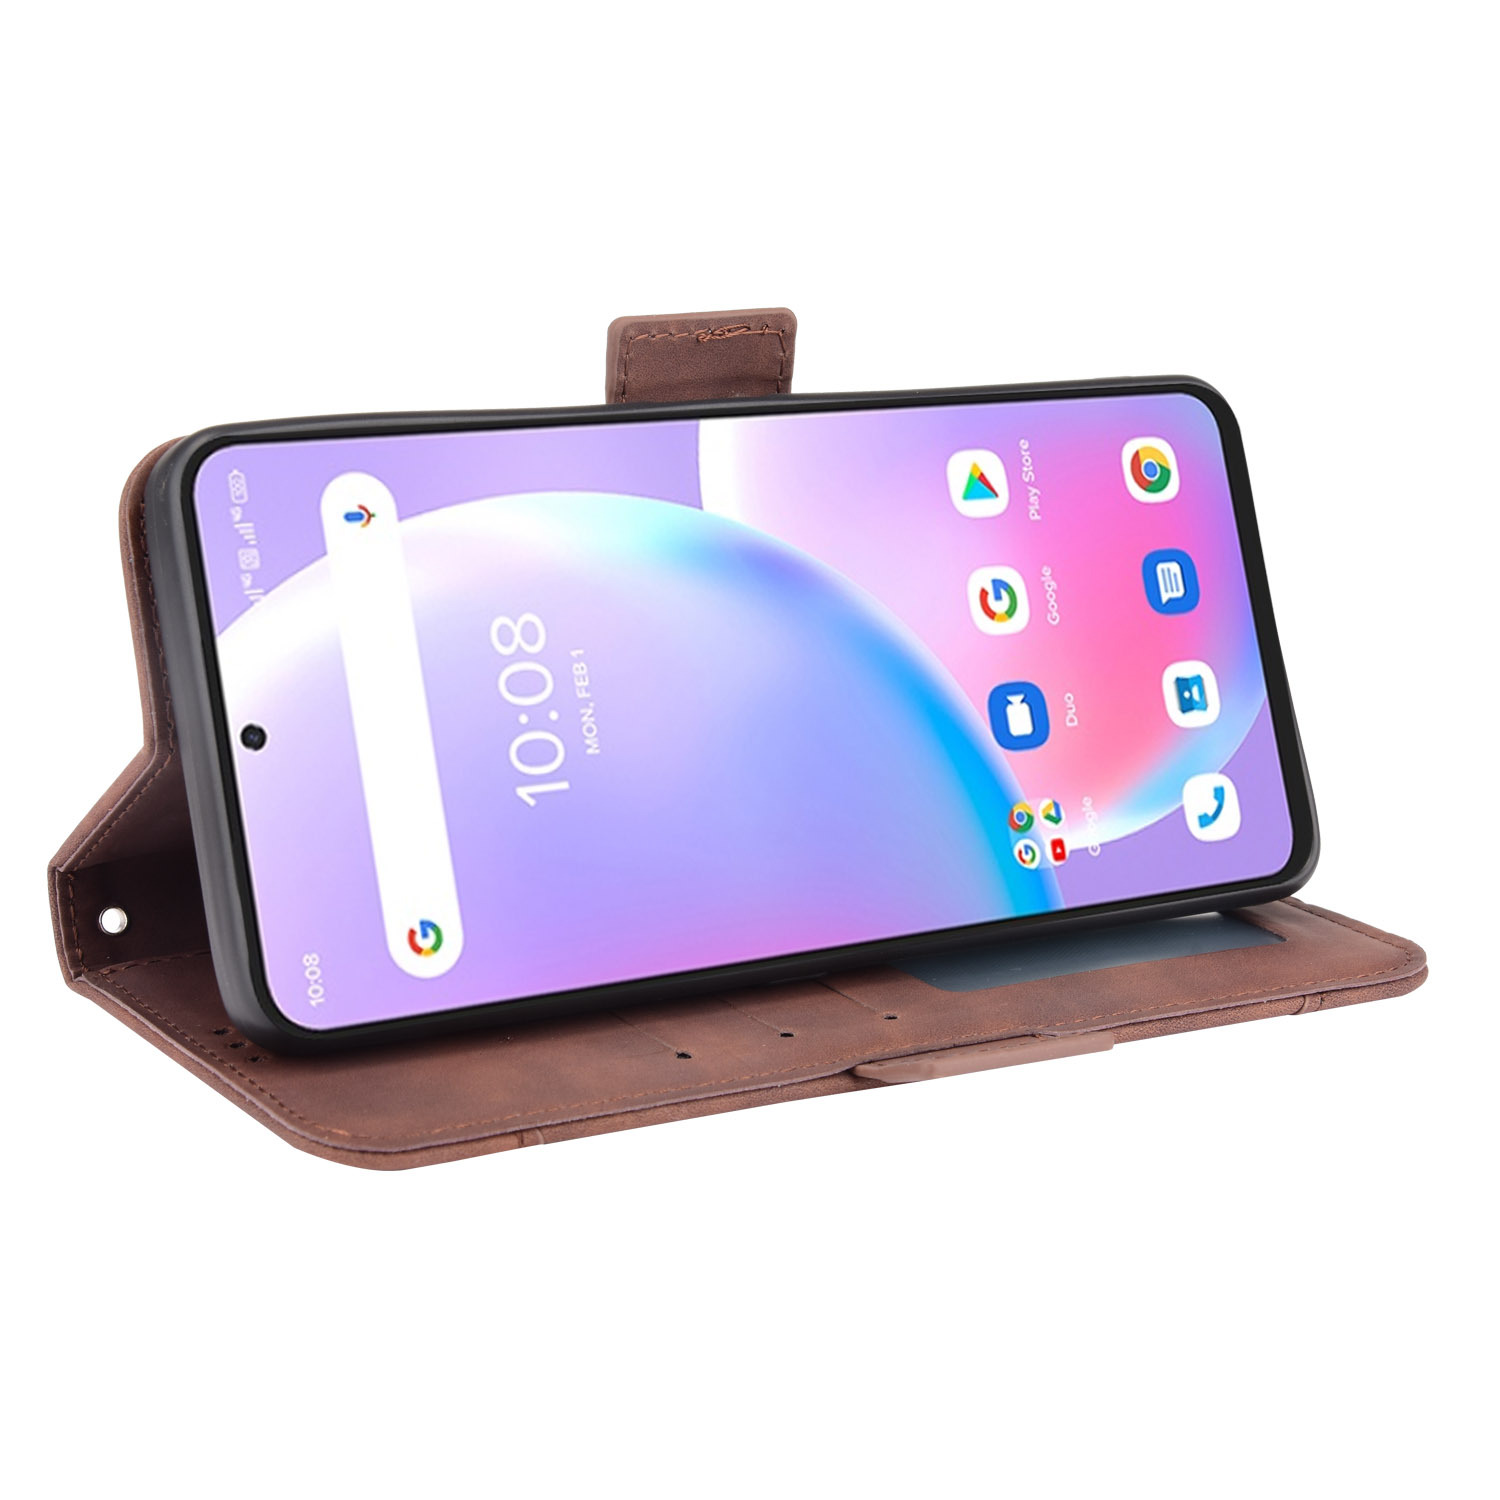 Bakeey-for-Umidigi-A11-Pro-Max-Case-Magnetic-Flip-with-Multiple-Card-Slot-Wallet-Folding-Stand-PU-Le-1915174-6